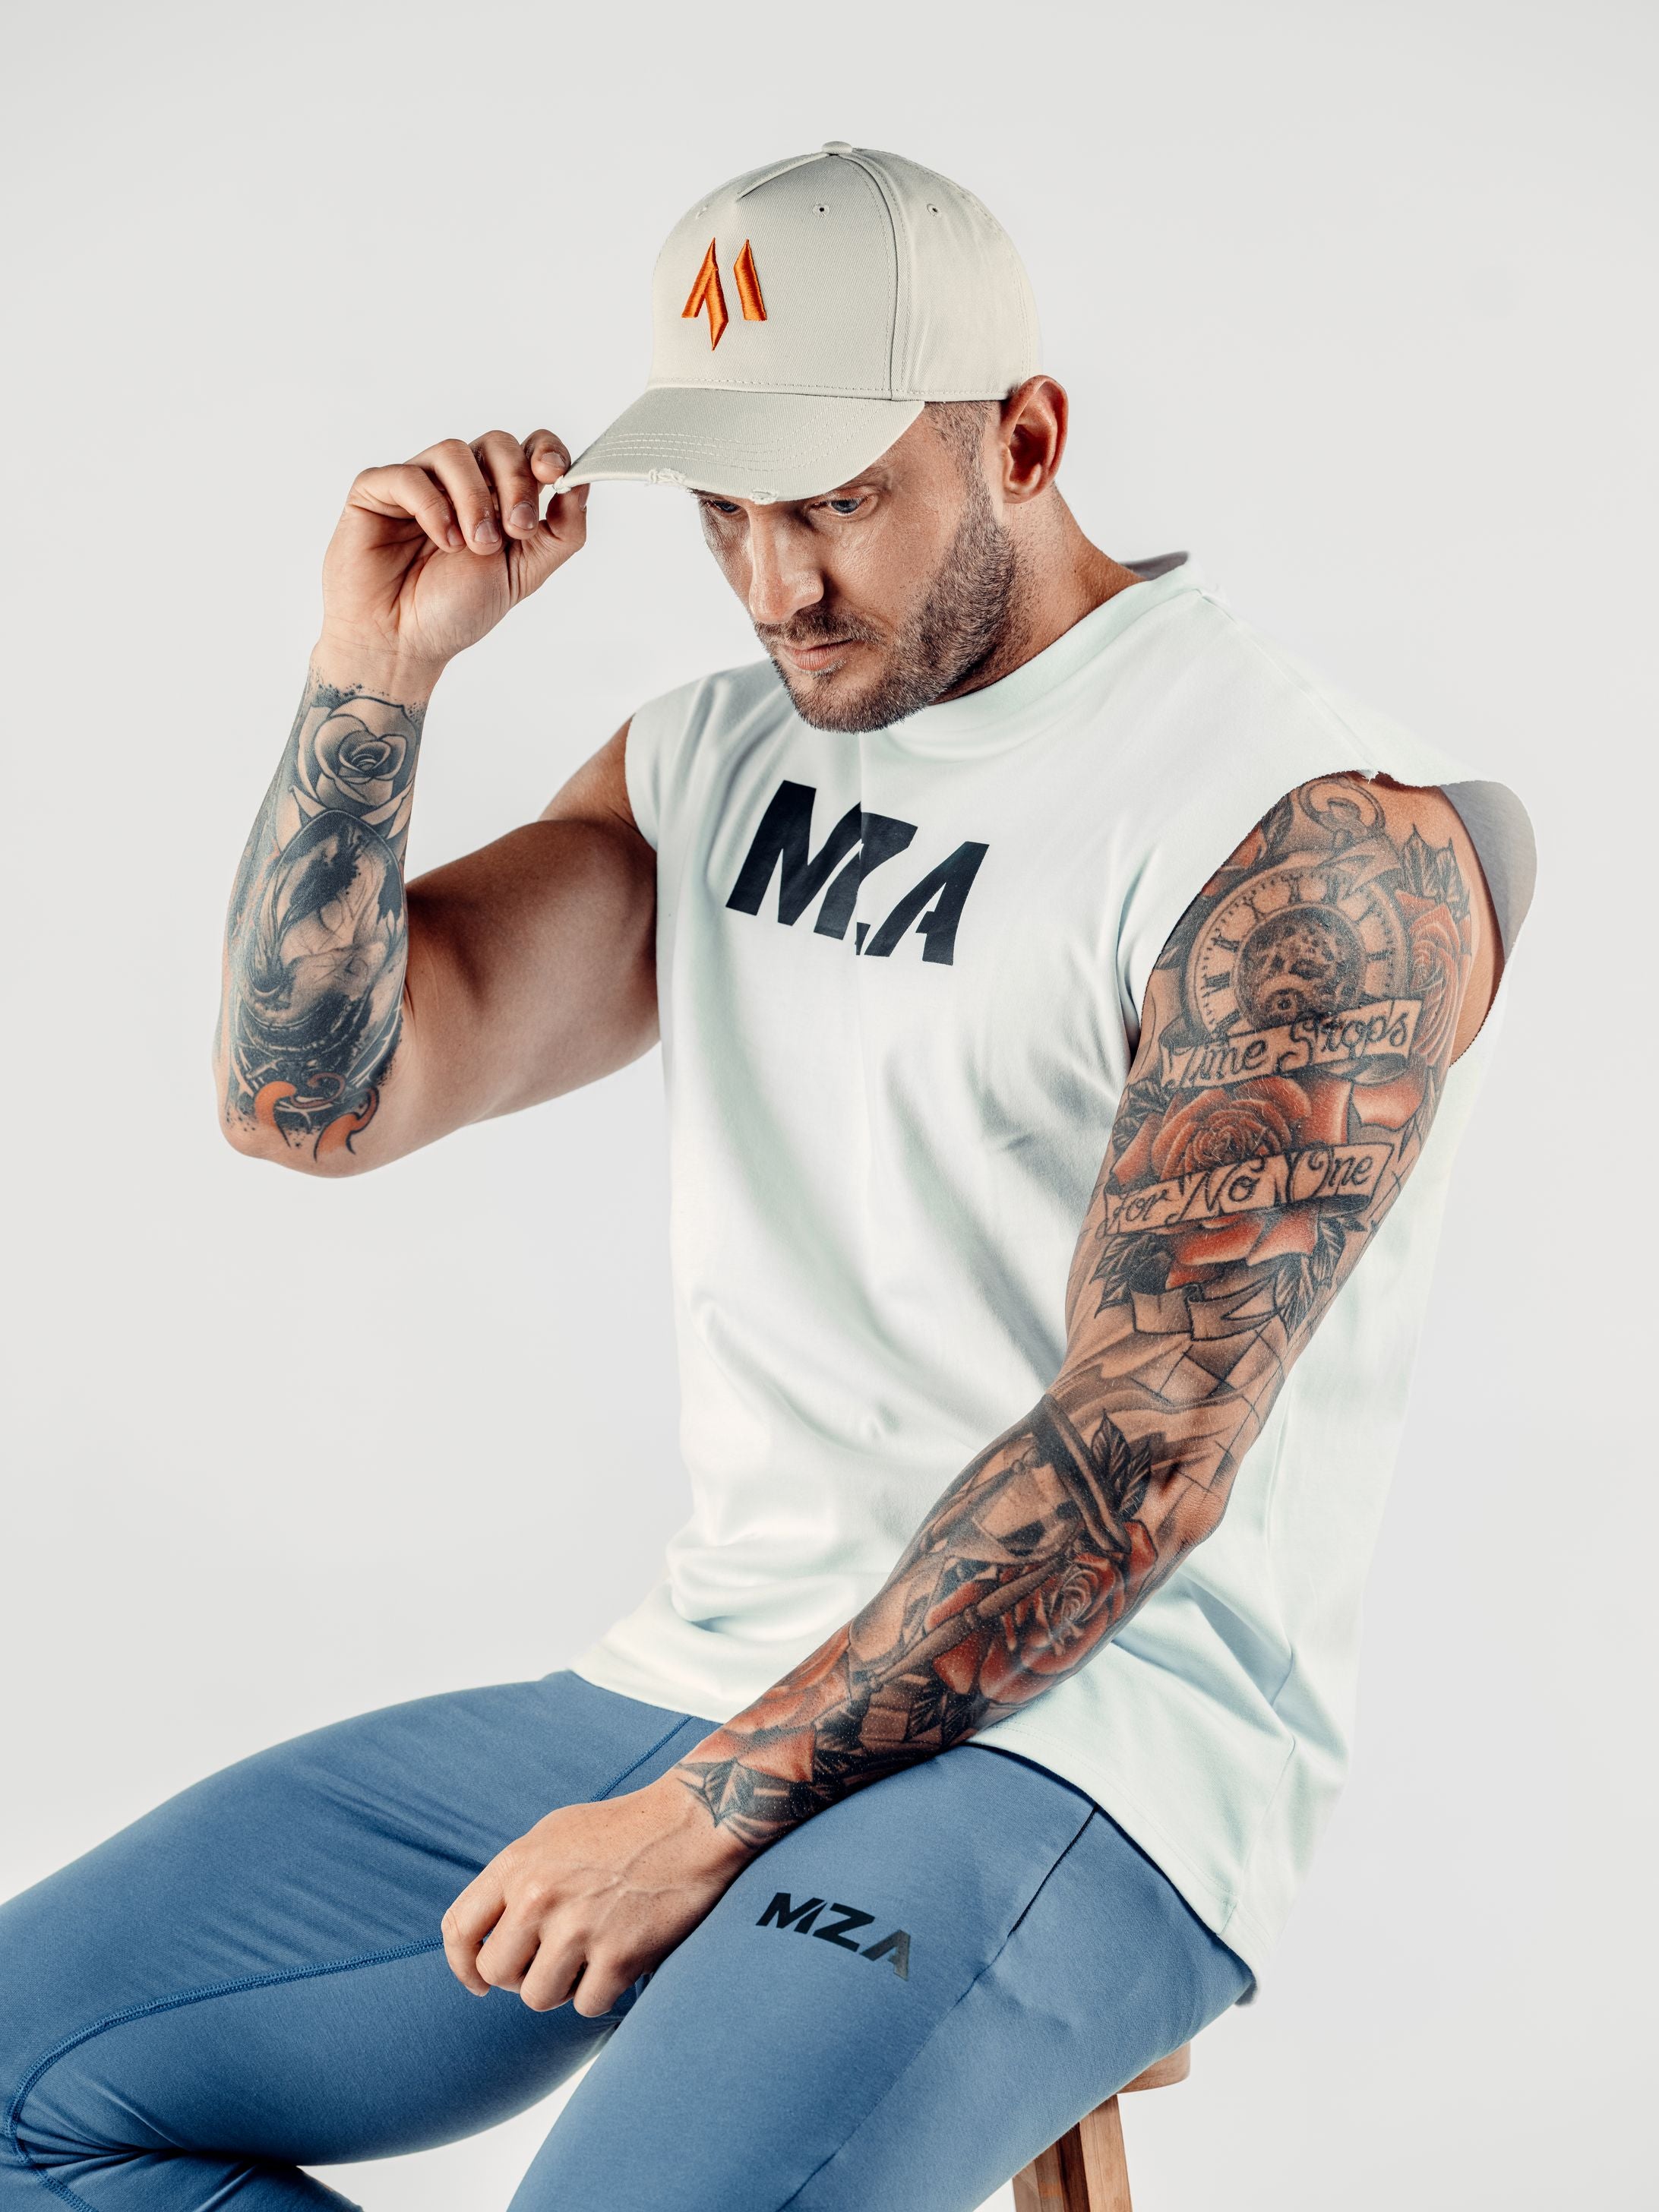 This is Shane wearing the new standard 3d distressed 5 panel in stone.  He is sitting on a slight angle with his right hand gripping the peak of the hat looking slightly down.  Shane is also wearing the new standard vest in white and the new standard joggers in blue.